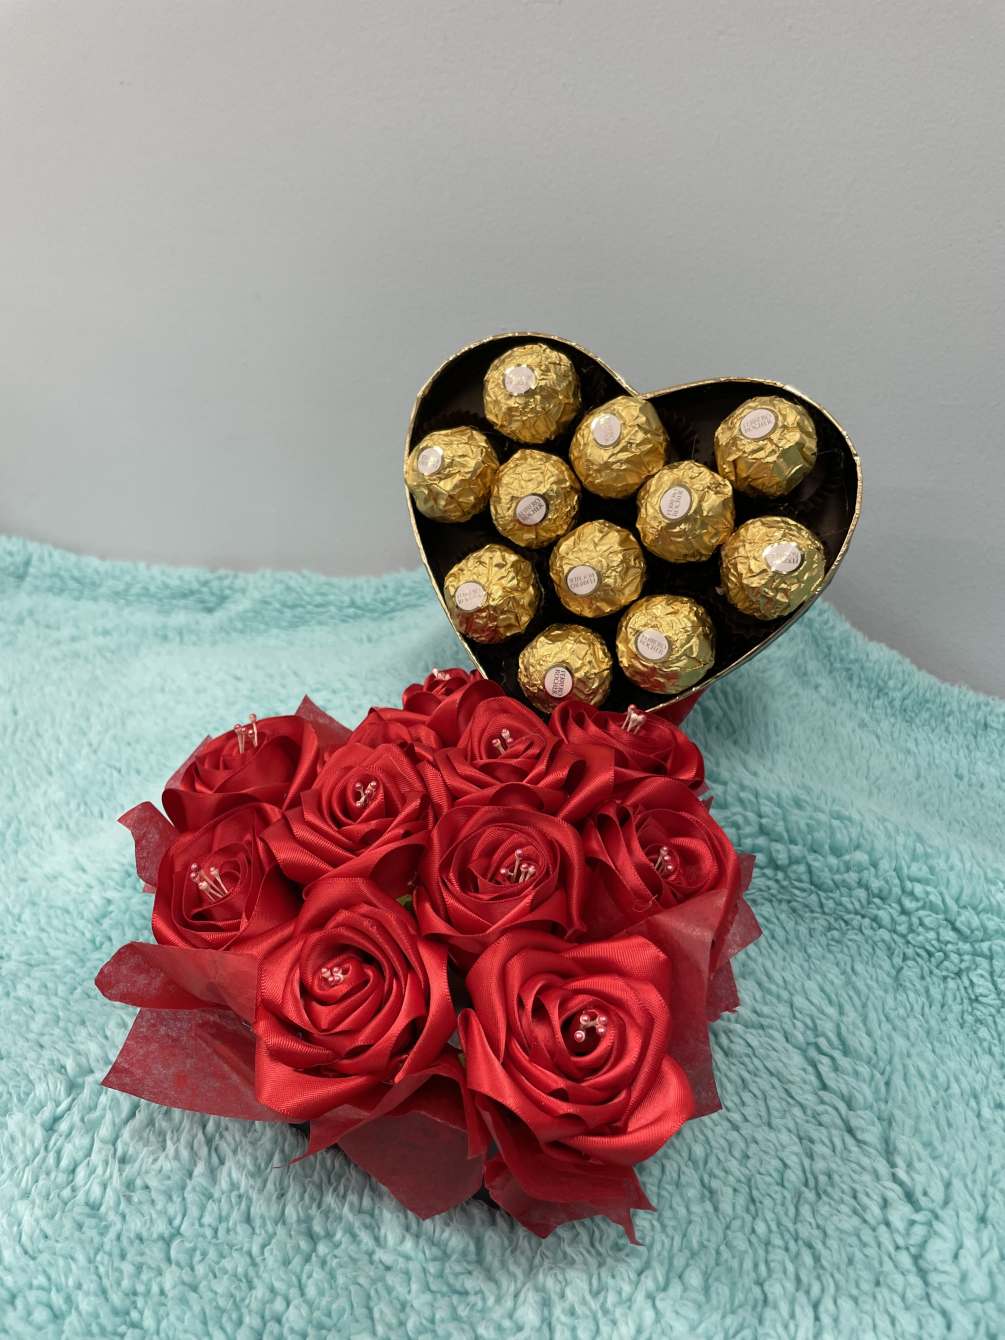 A combination of eternal roses with some chocolate to show your person